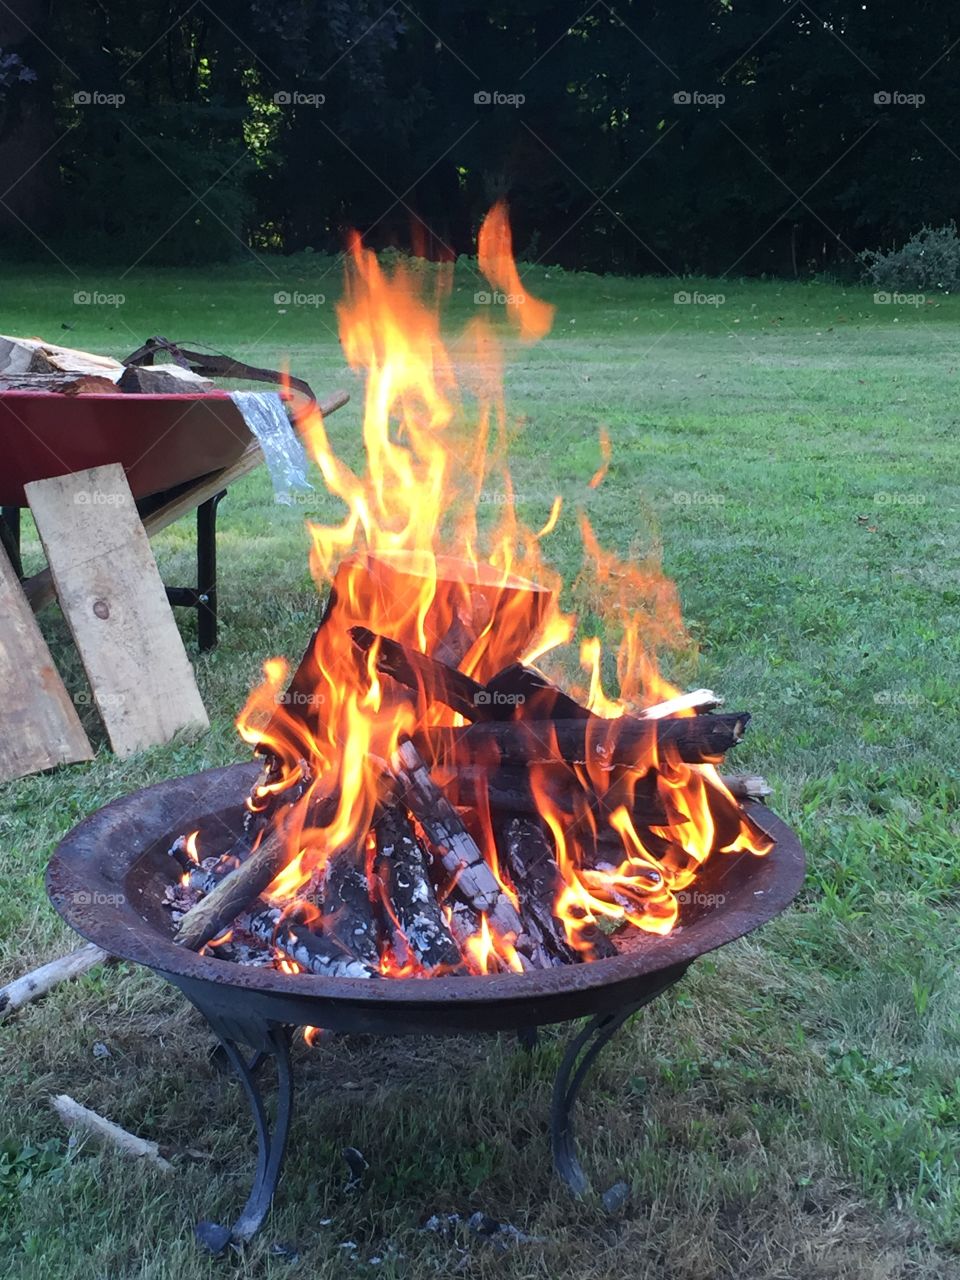 One of the last fires for this home fire pit 